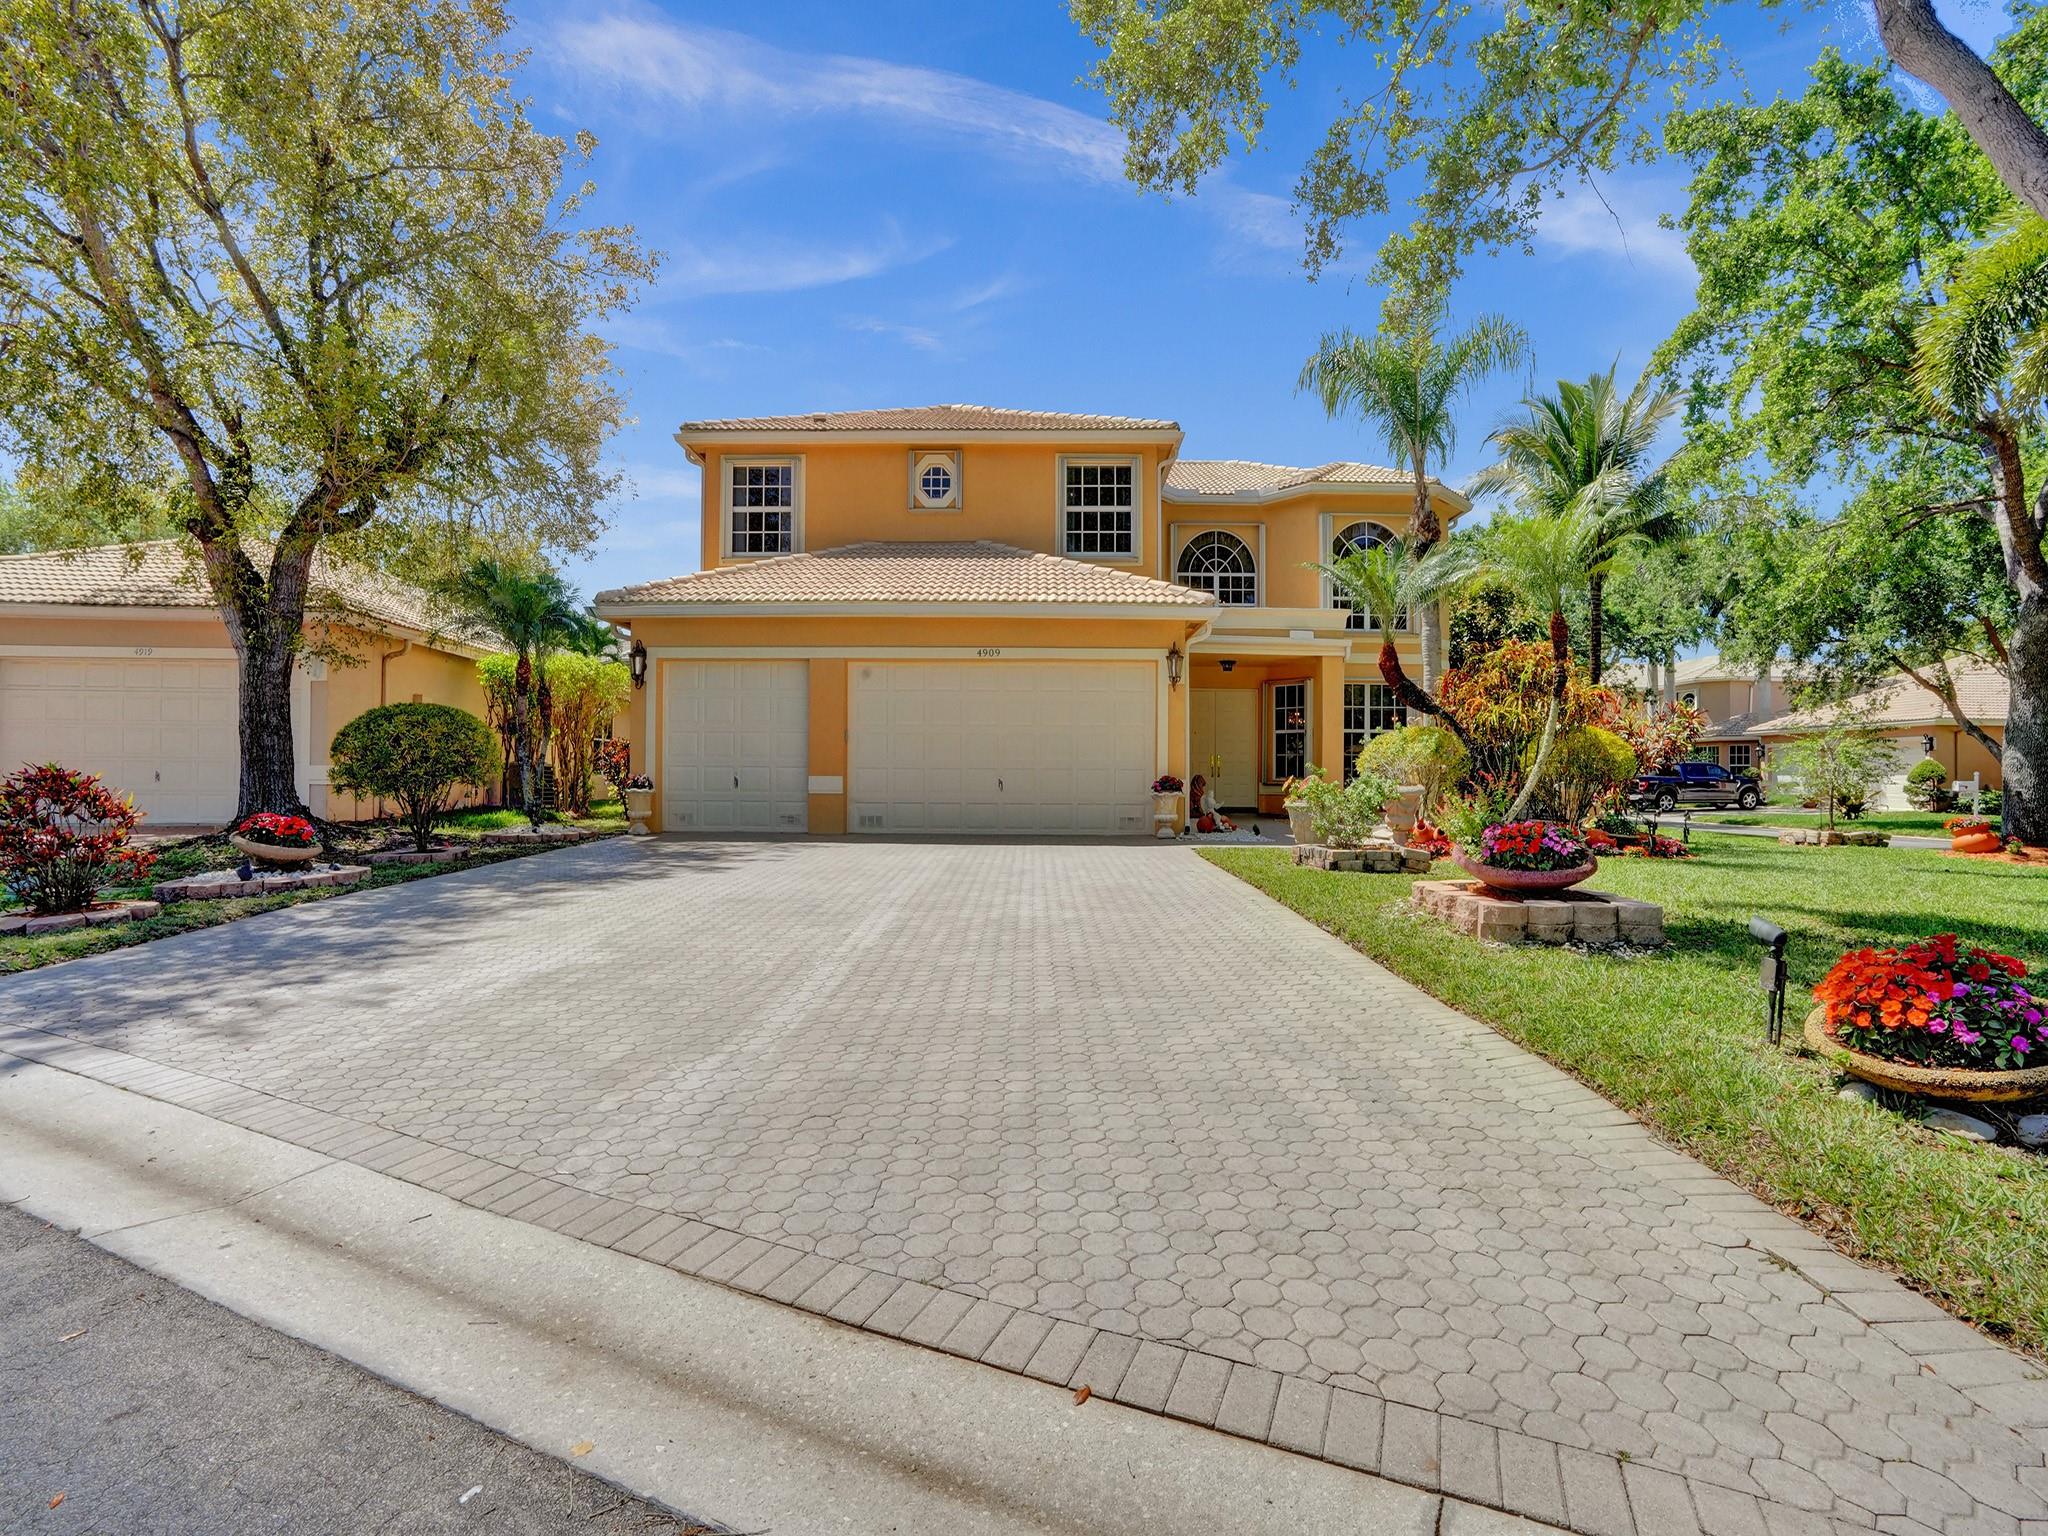 4909 NW 115th Way, Coral Springs, FL 